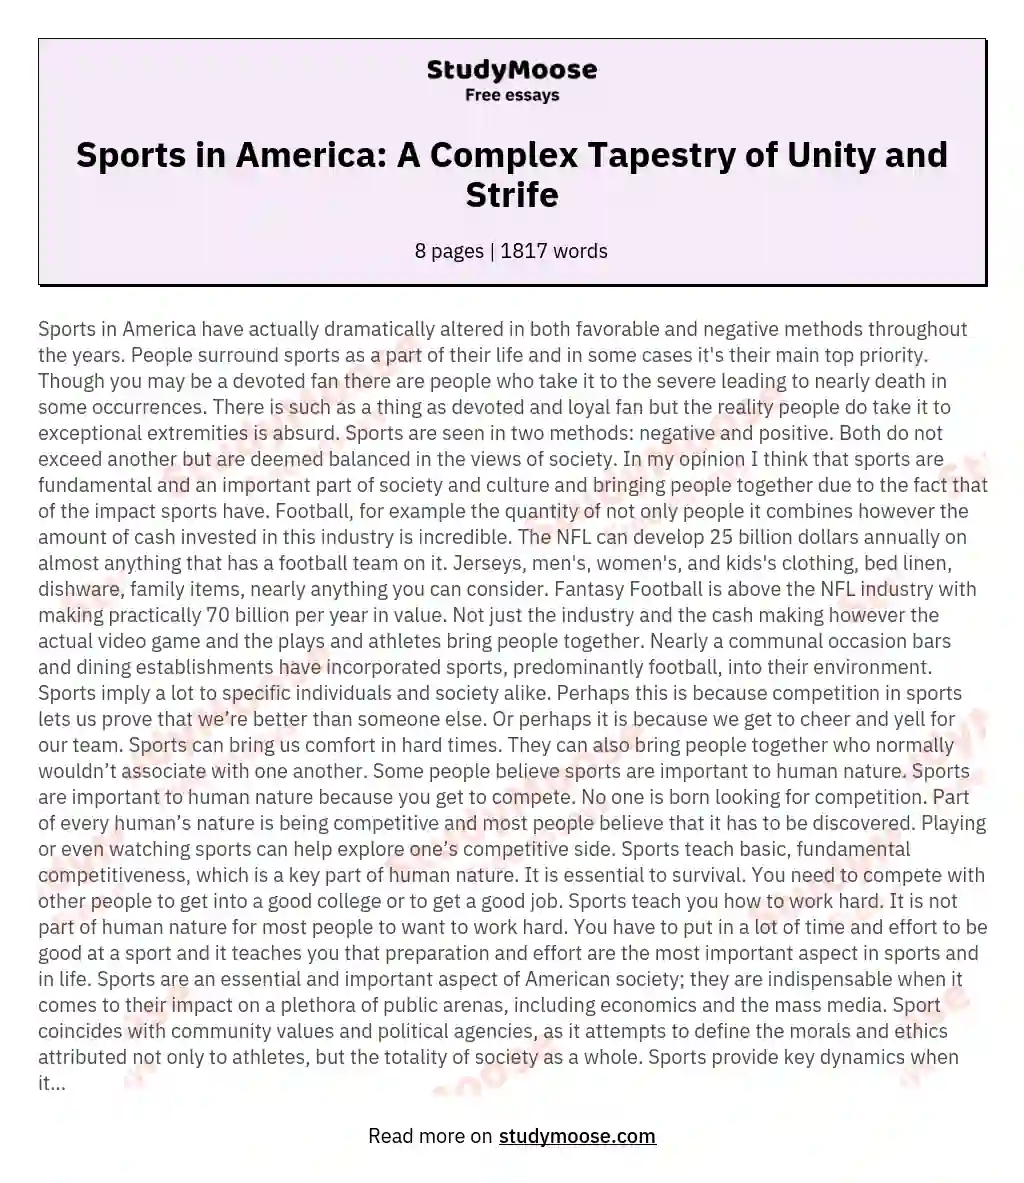 Sports in America: A Complex Tapestry of Unity and Strife essay